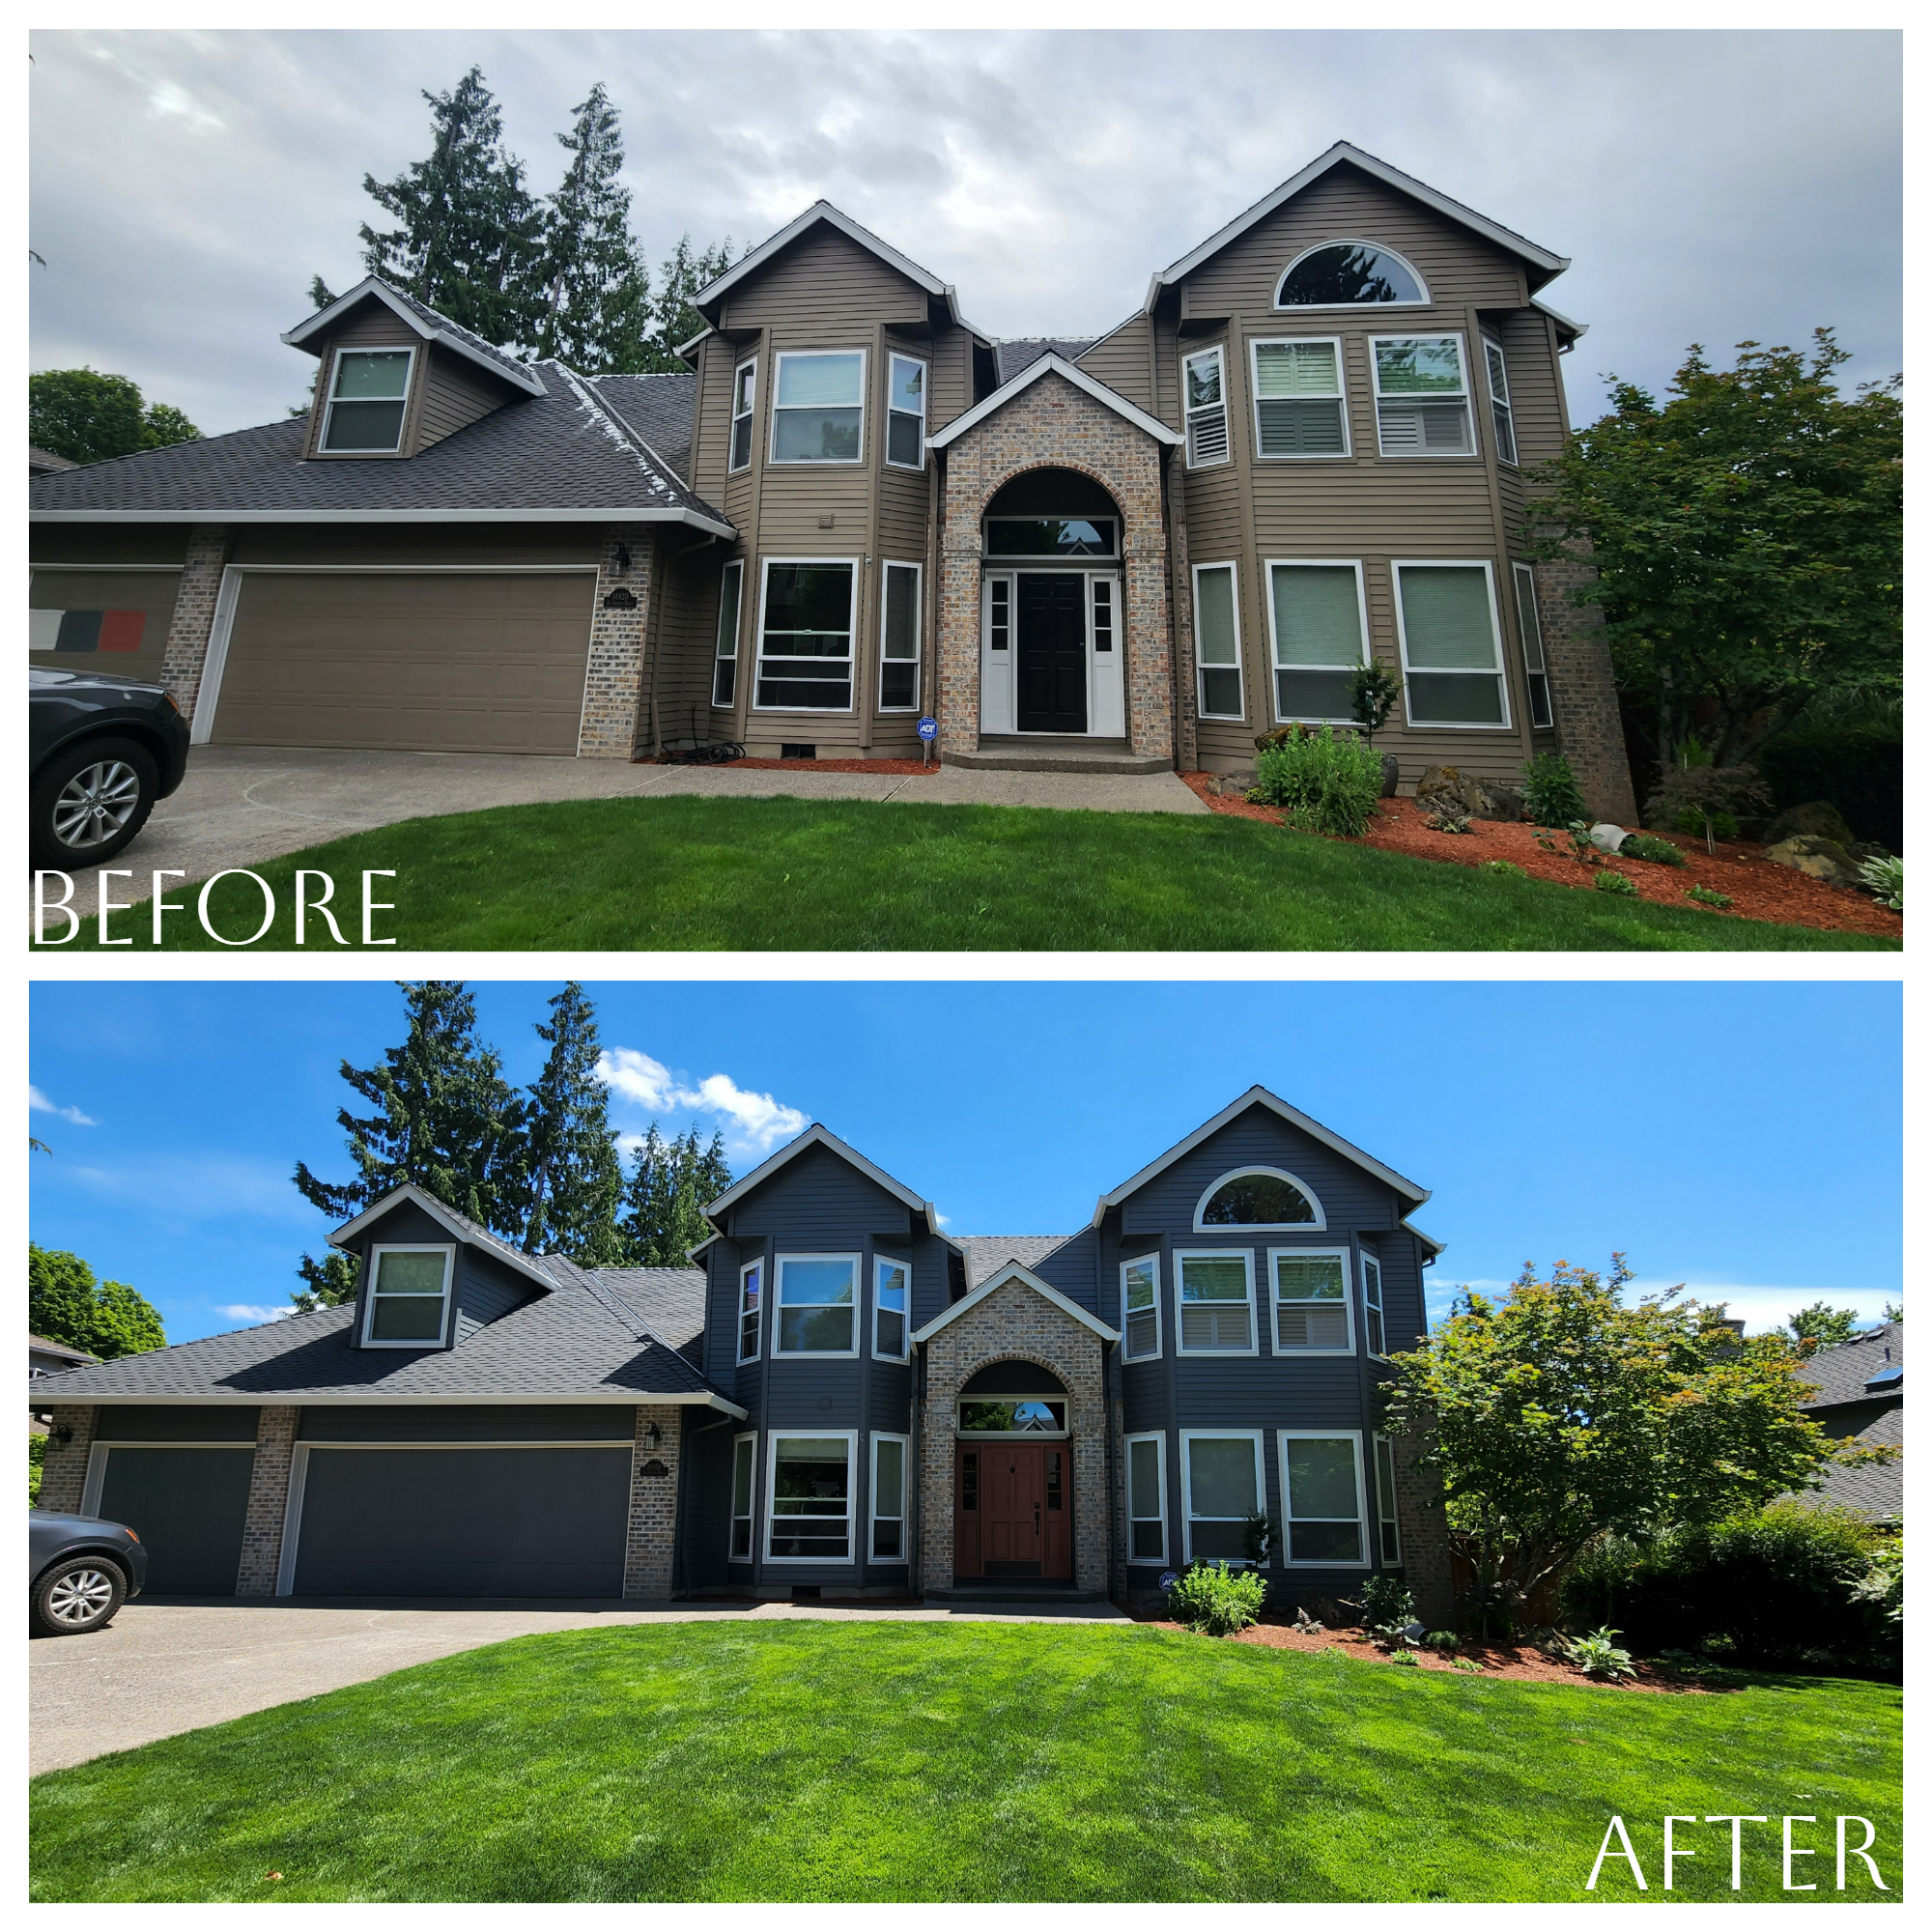 Before and after pictures of a home showcasing its secure exterior painting.